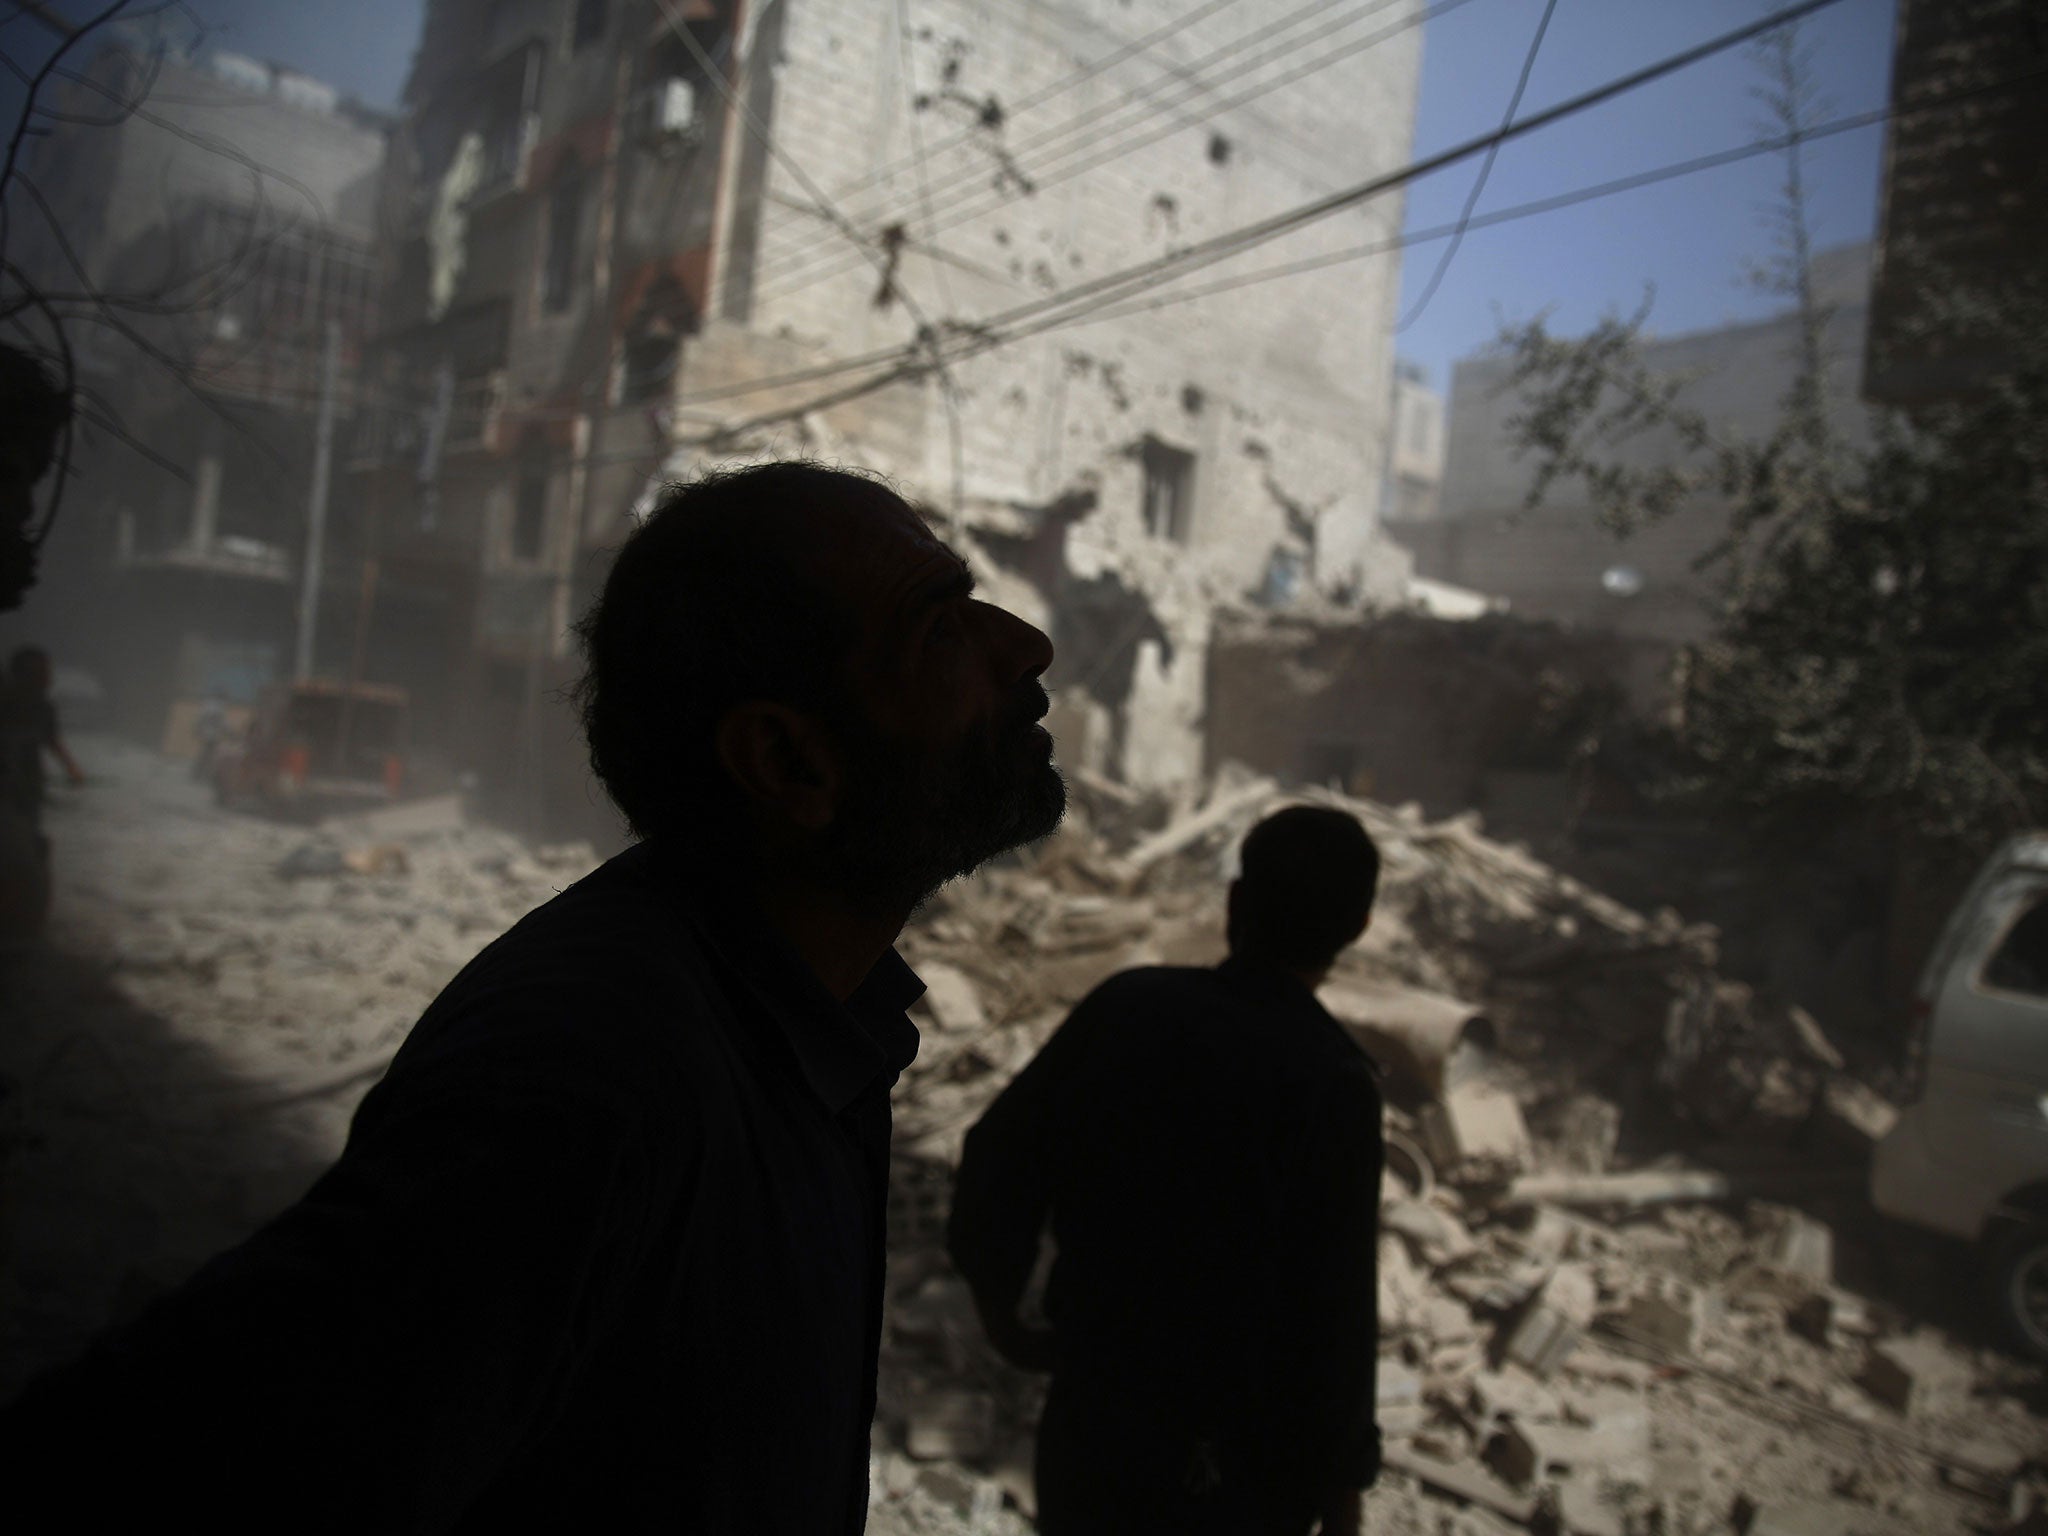 A Syrian civilian looks at the devastation in rebel-held territory